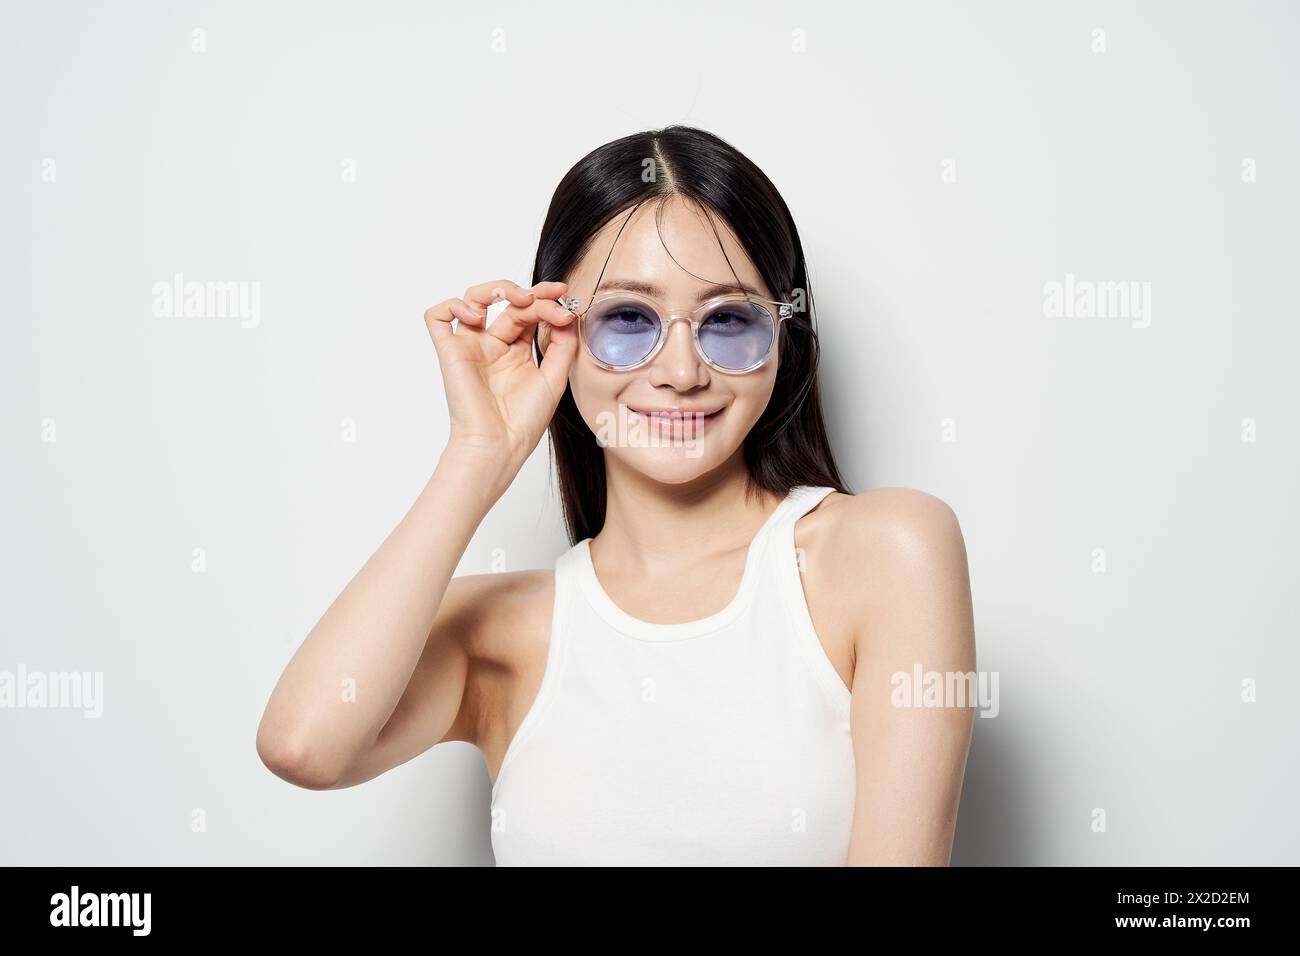 an Asian woman wearing sunglasses and smiling Stock Photo